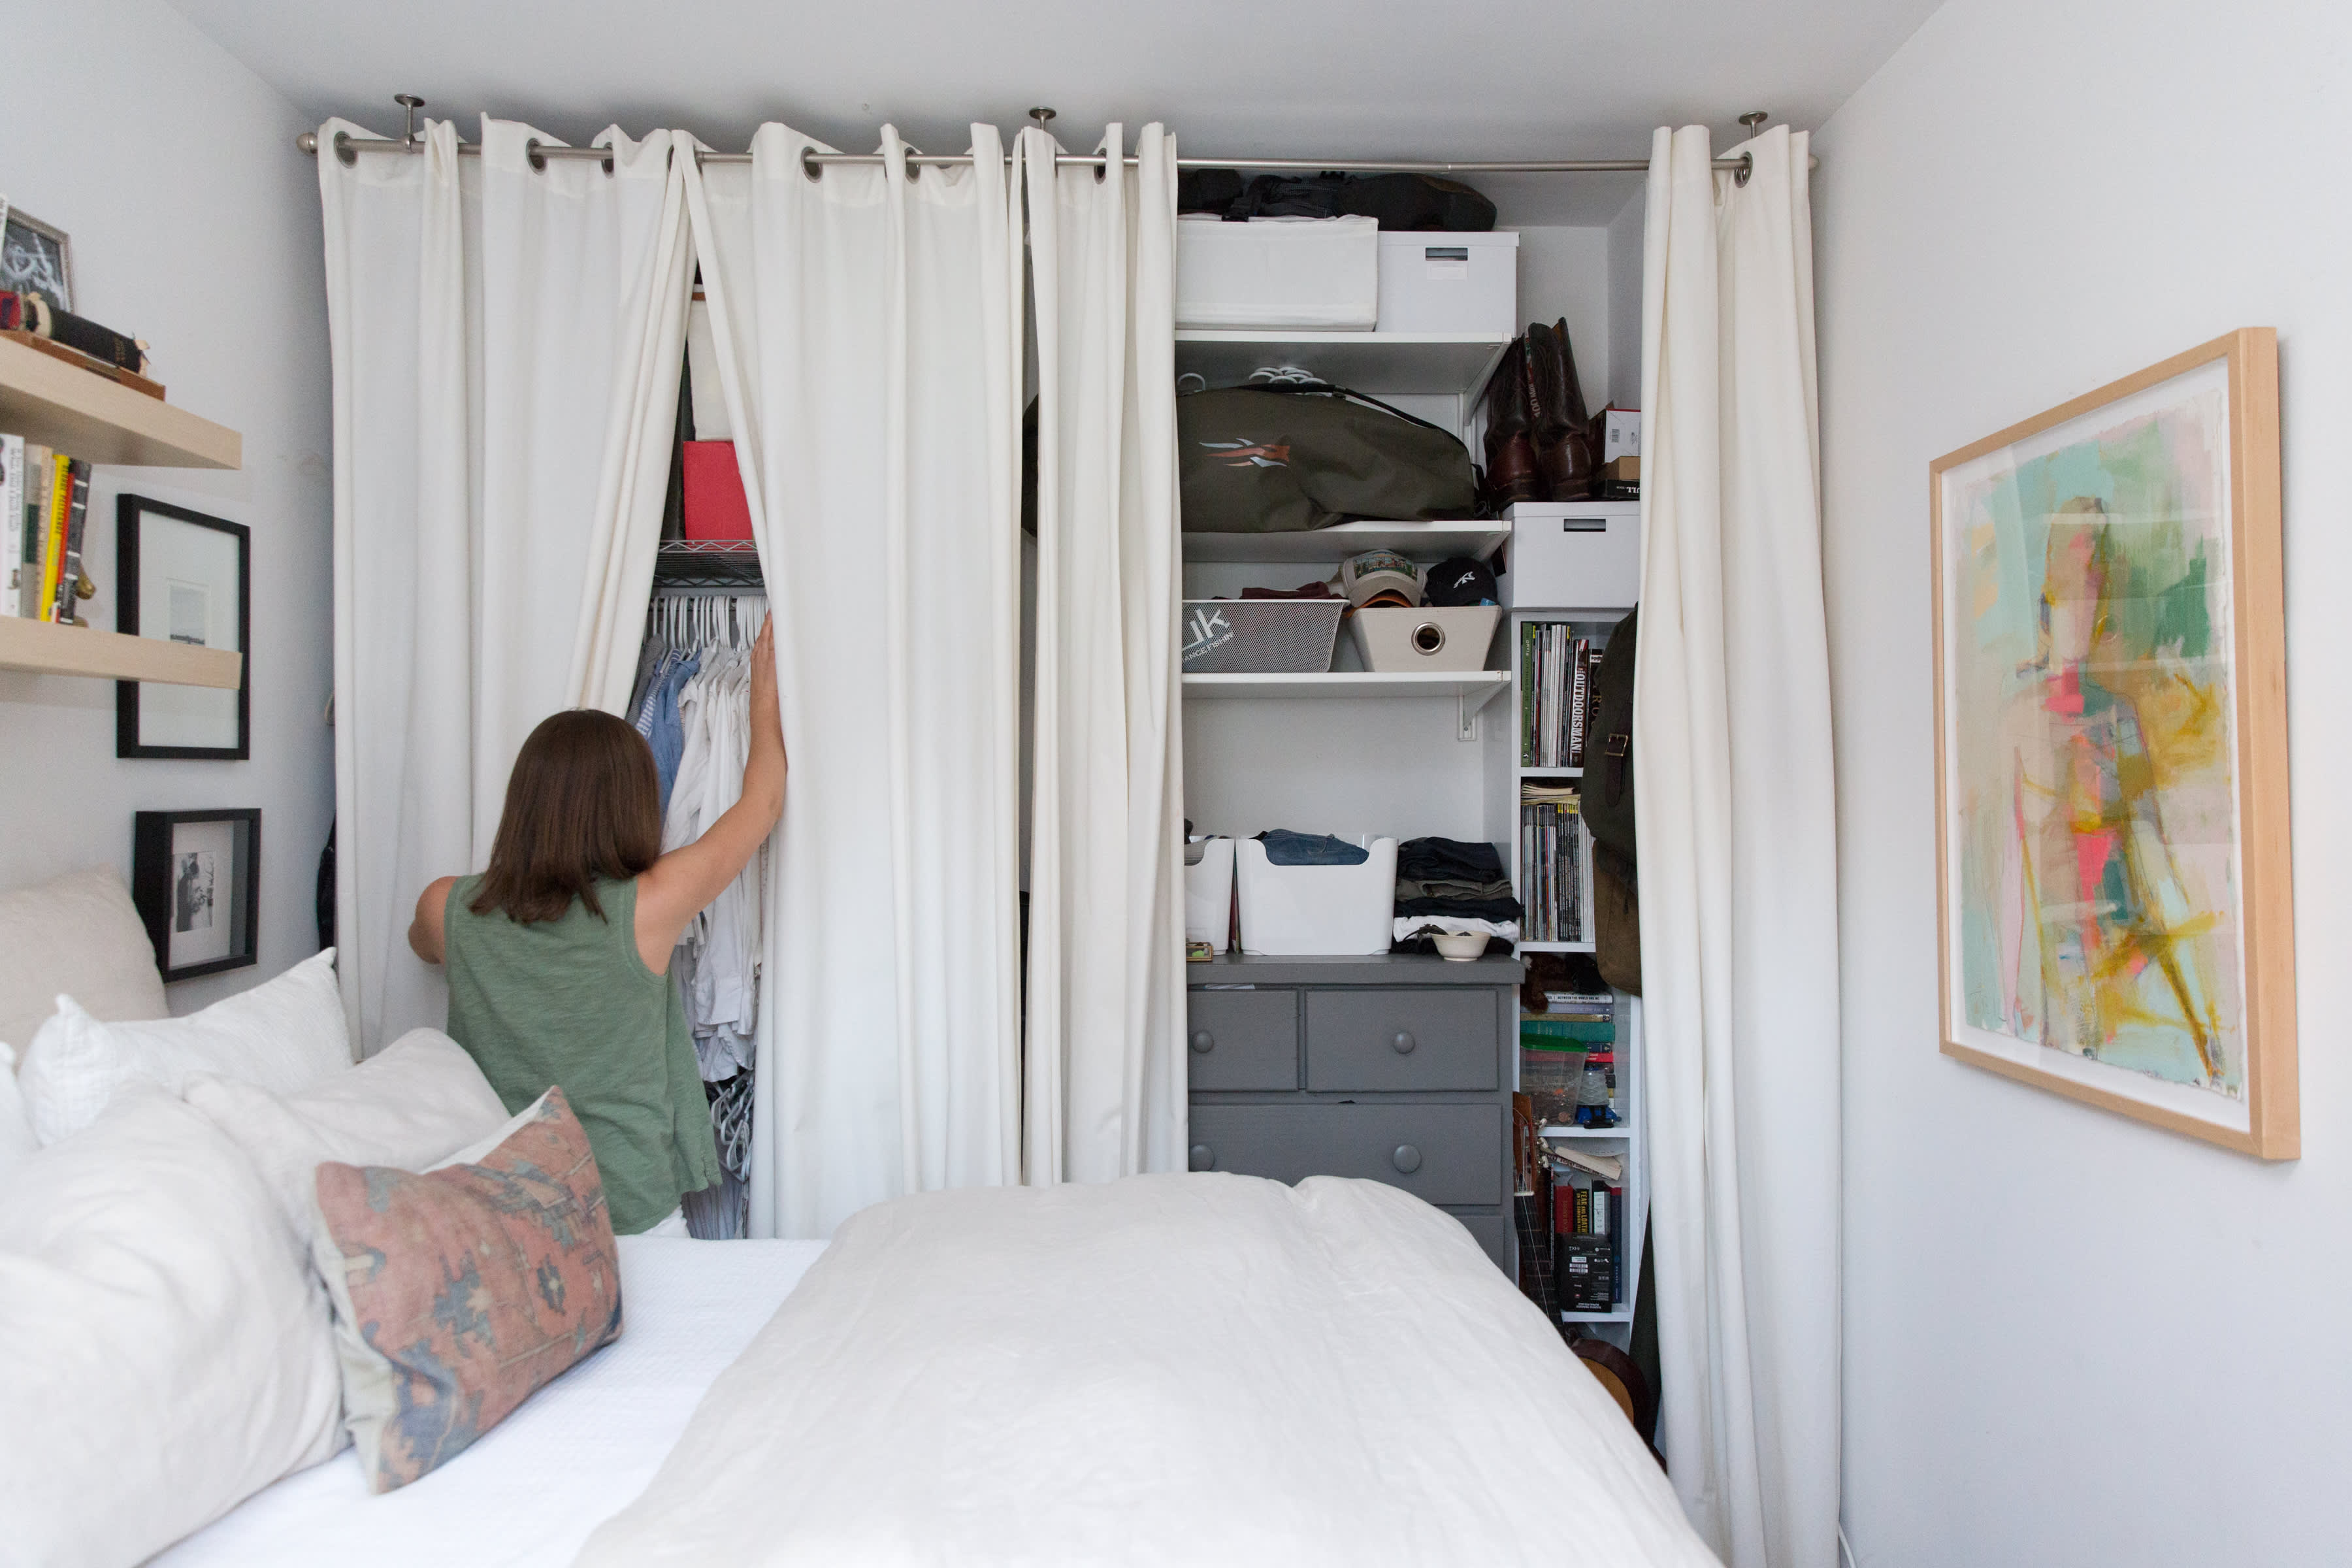 Storage ideas for small bedrooms – 10 ways to streamline your space